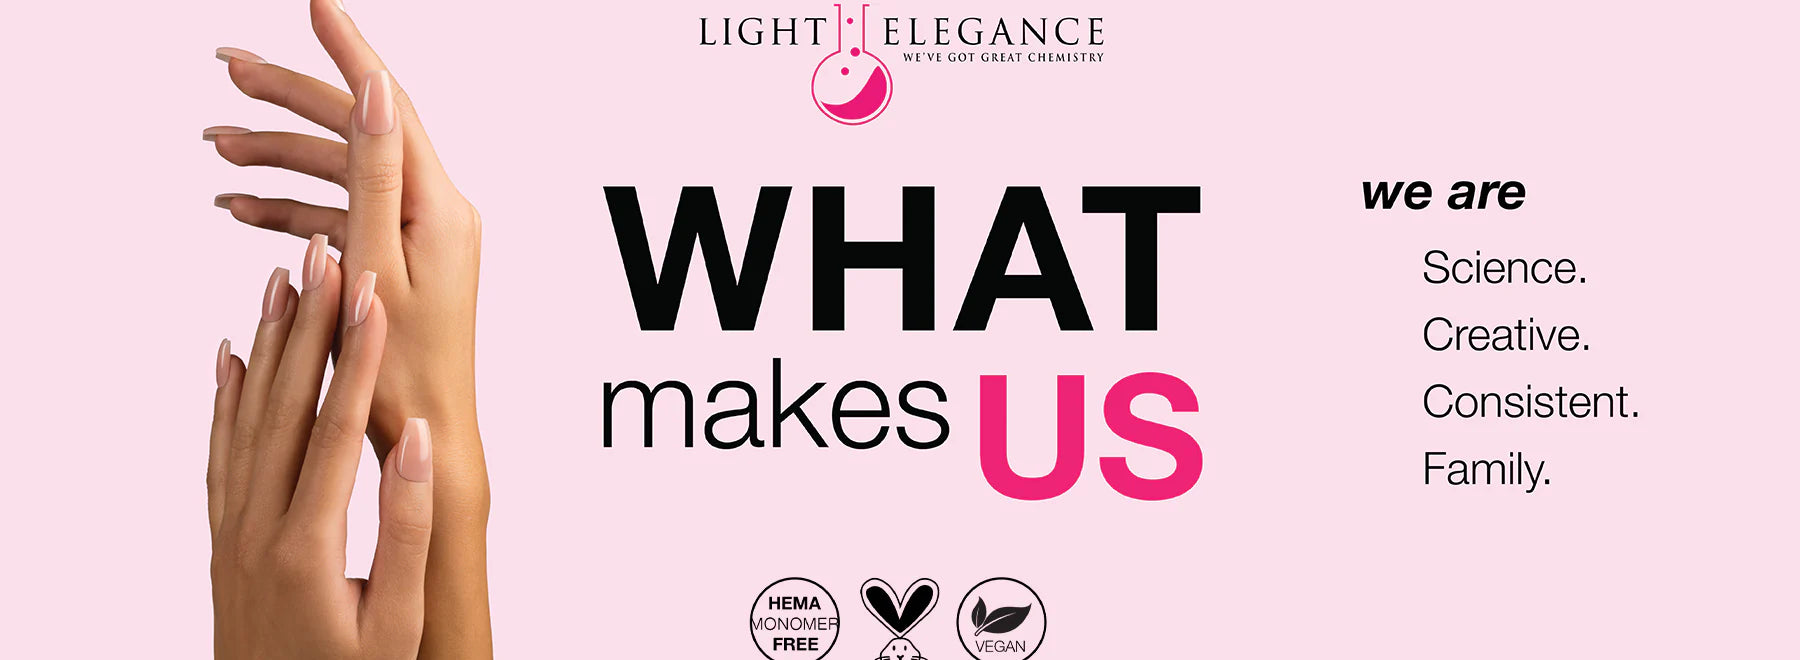 WHAT MAKES US | Light Elegance launches new campaign to explain core brand pillars